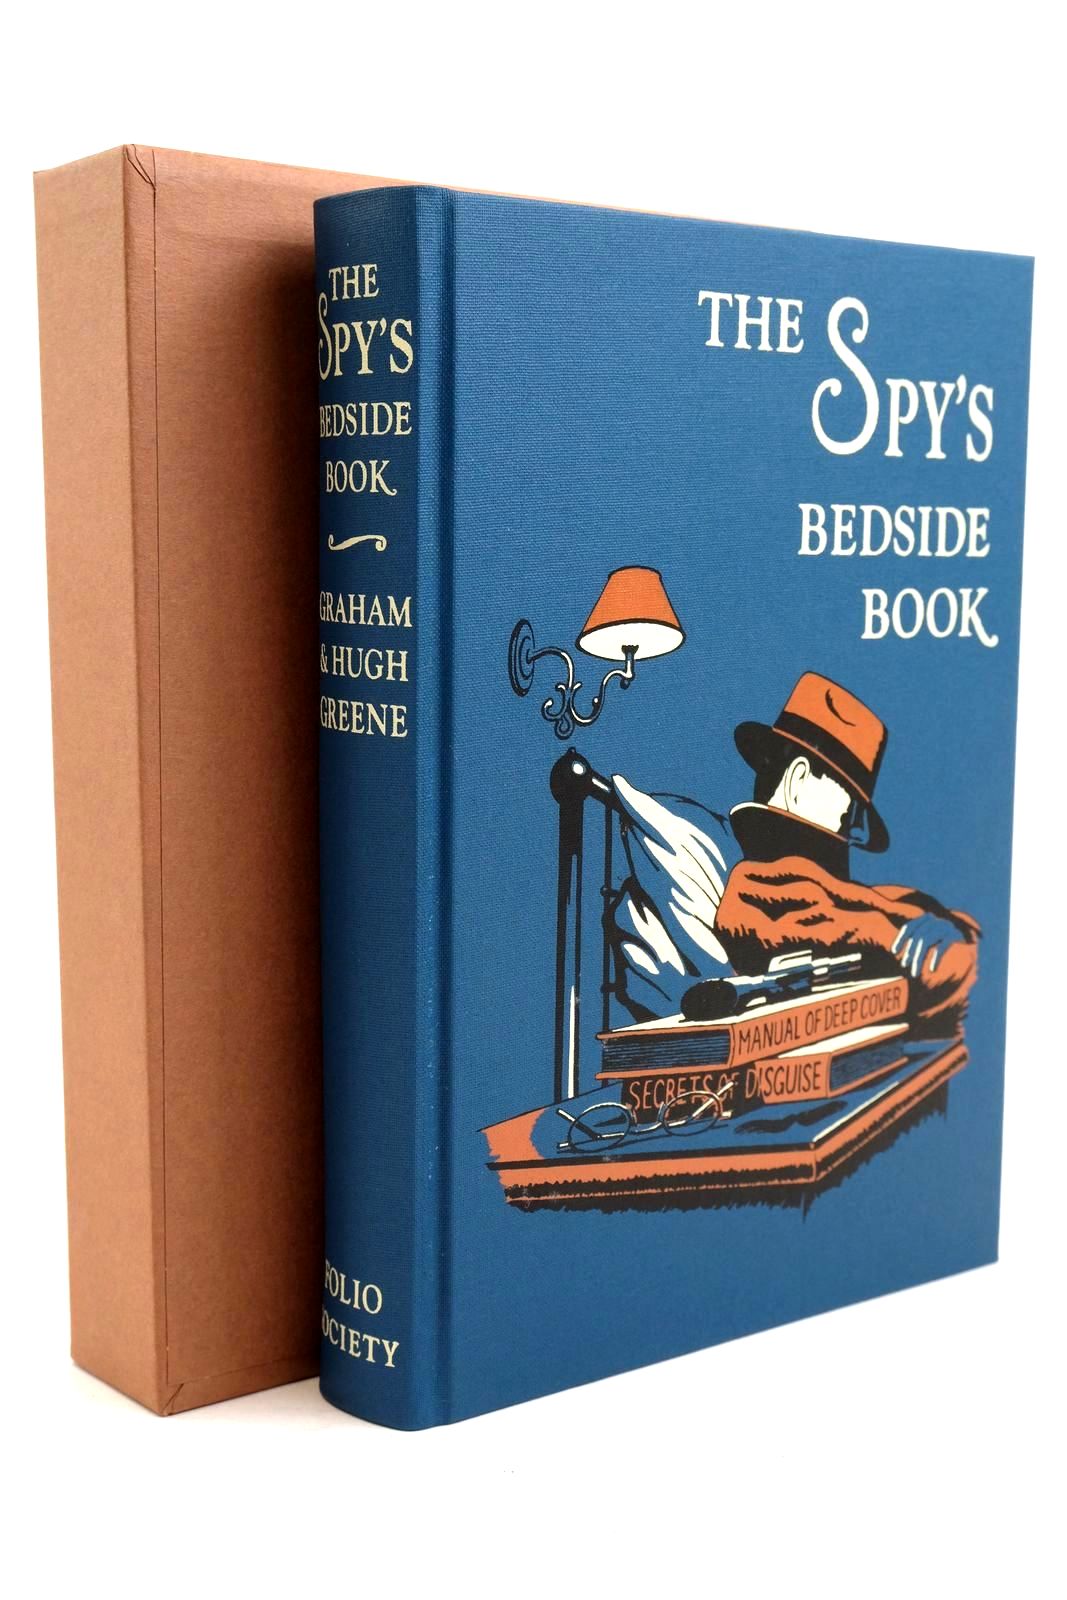 Photo of THE SPY'S BEDSIDE BOOK written by Greene, Graham
Greene, Hugh
Rimington, Stella illustrated by Hardcastle, Nick published by Folio Society (STOCK CODE: 1320759)  for sale by Stella & Rose's Books